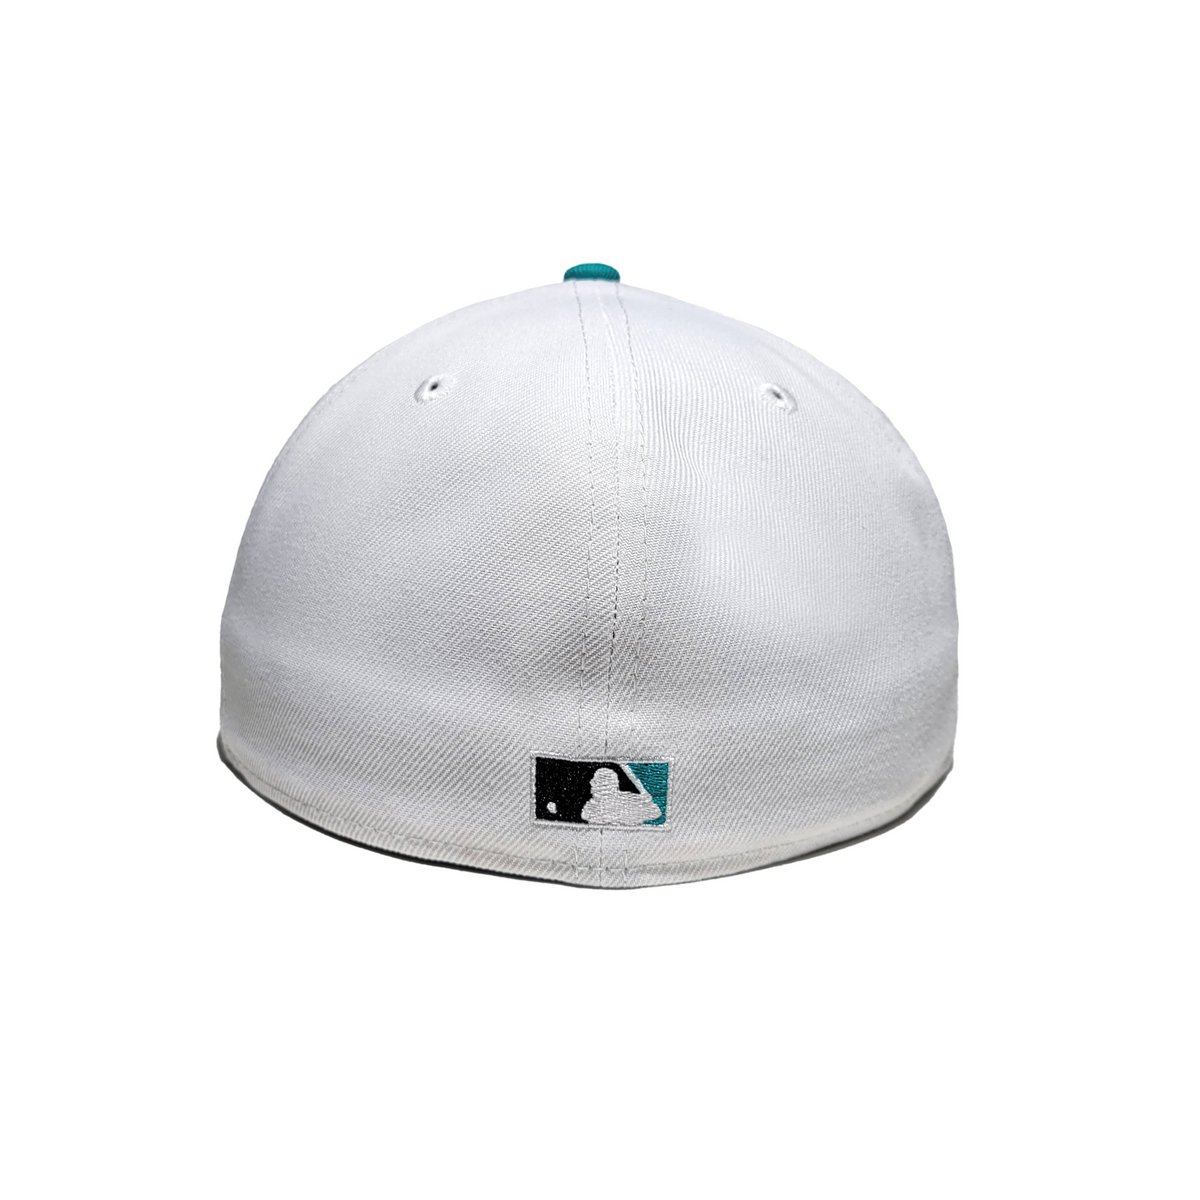 New Era 59FIFTY Teal Lime Washington Nationals 10th Anniversary Patch Hat - White, Teal White/Teal / 7 3/8